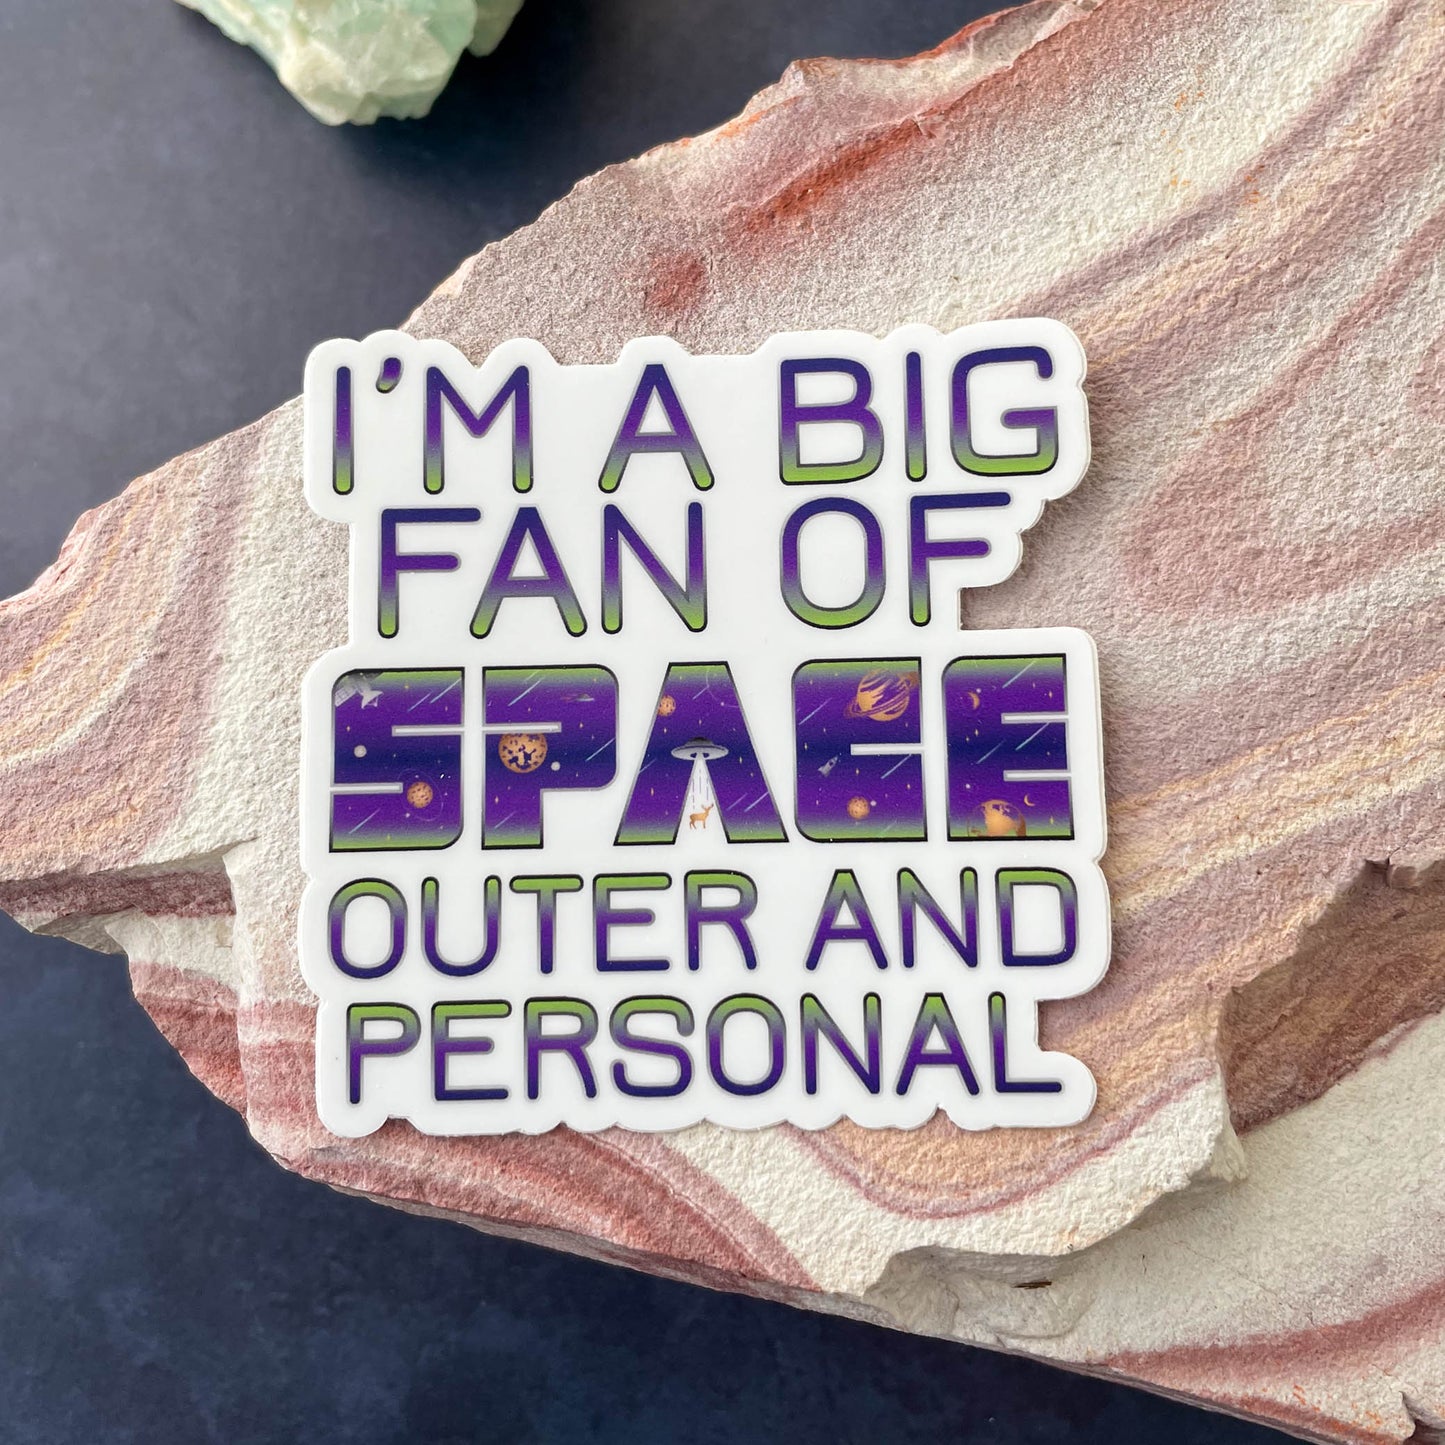 Big Fan of Space - Outer and Personal 3" Sticker on rock